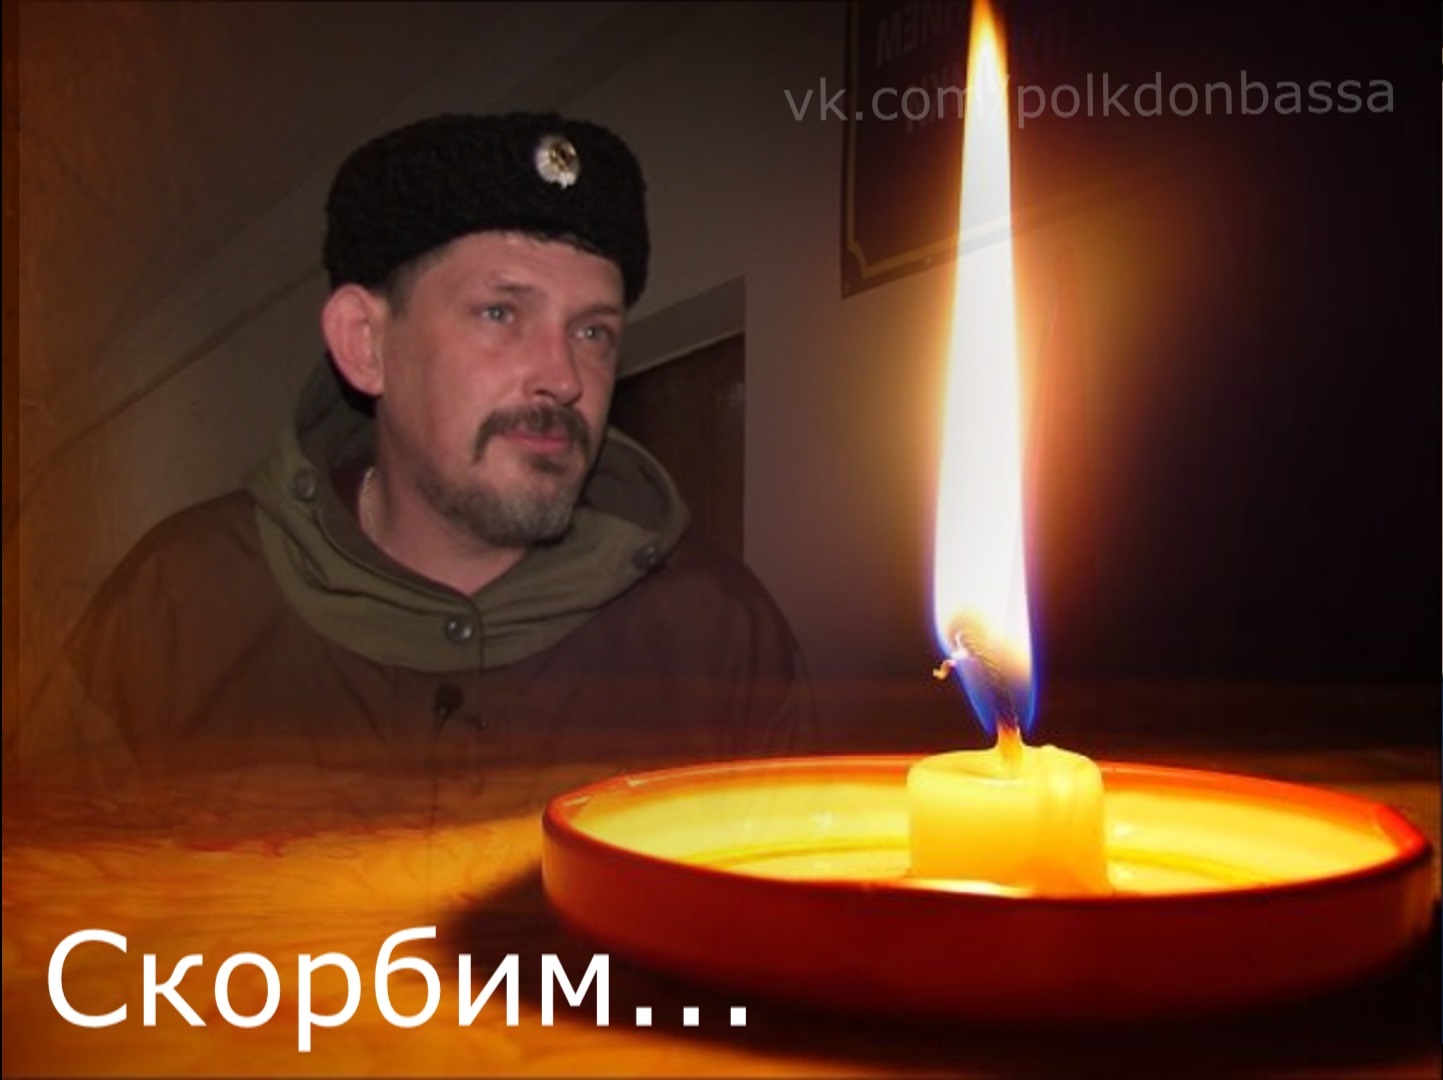 Commander of a separate Cossack Regiment of the People’s militia Pavel Dryomov perished